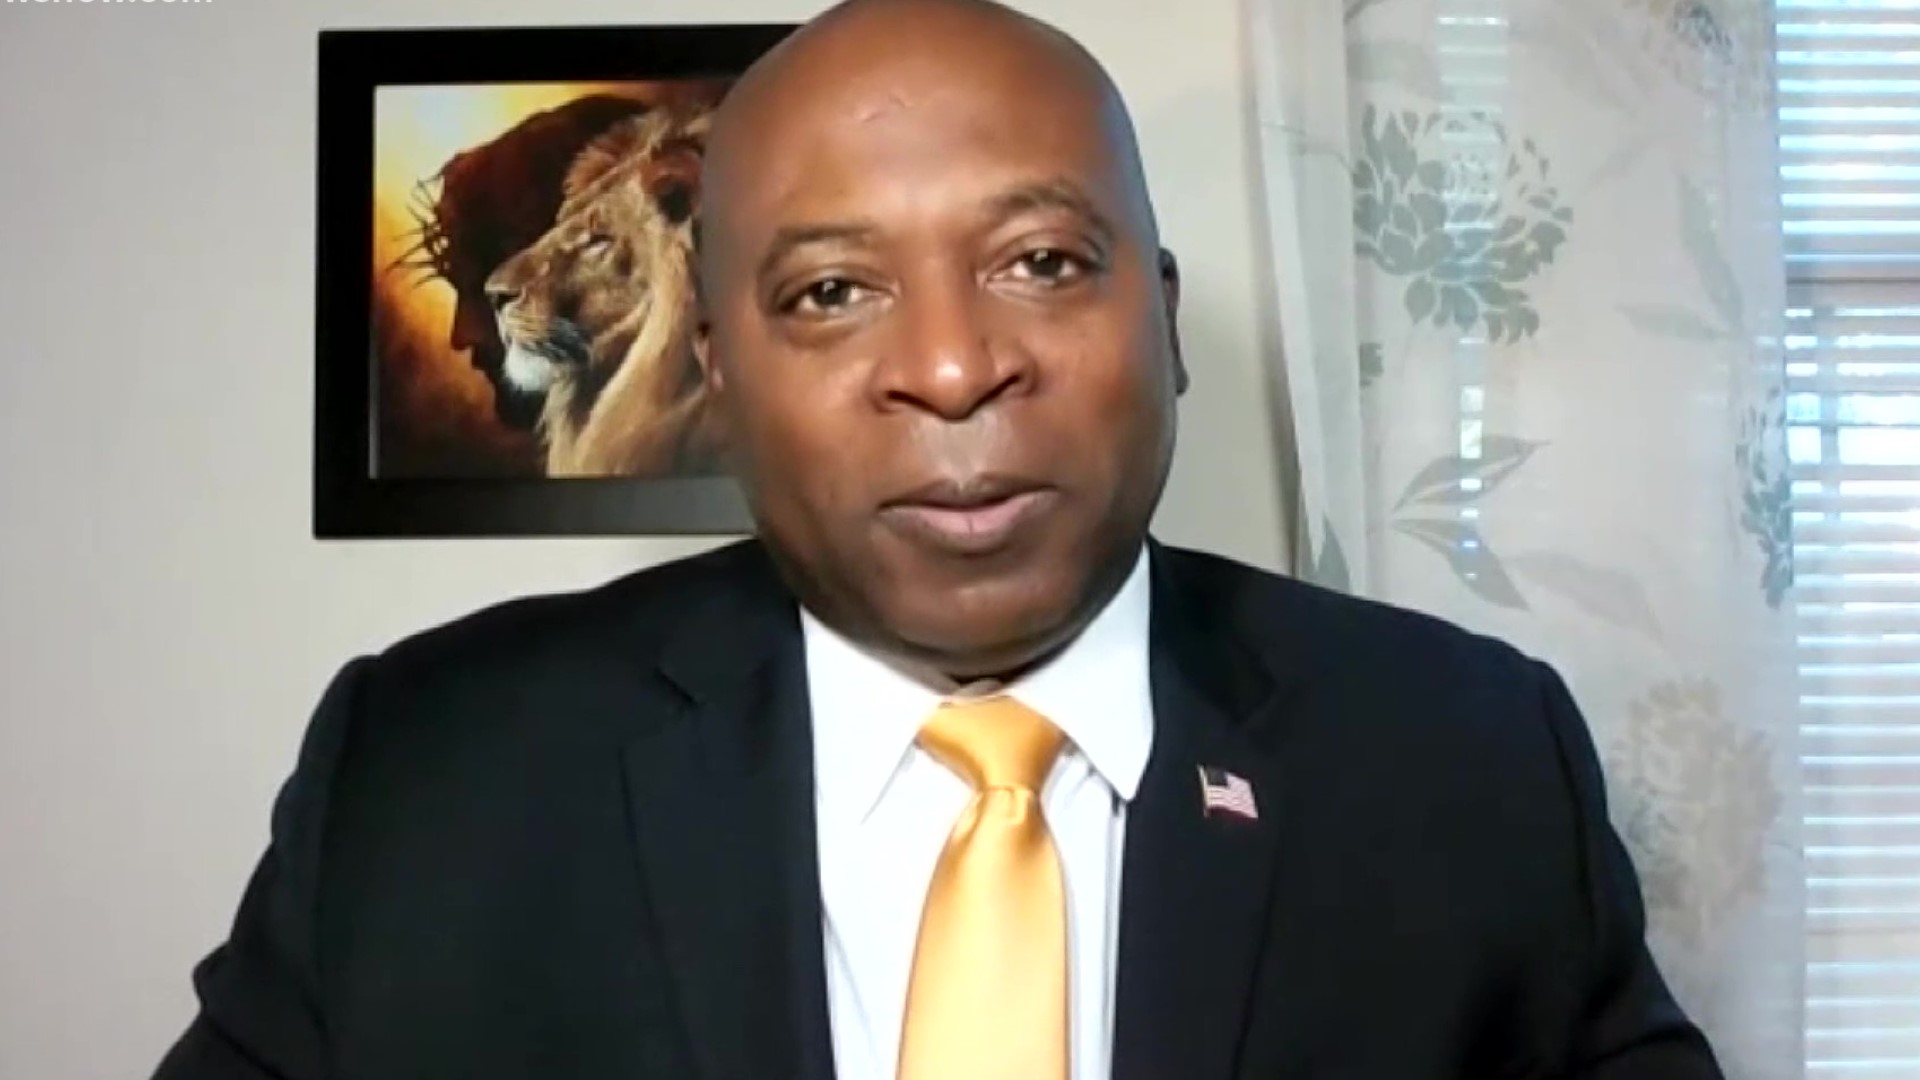 This election will replace the late Representative Donald McEachin.